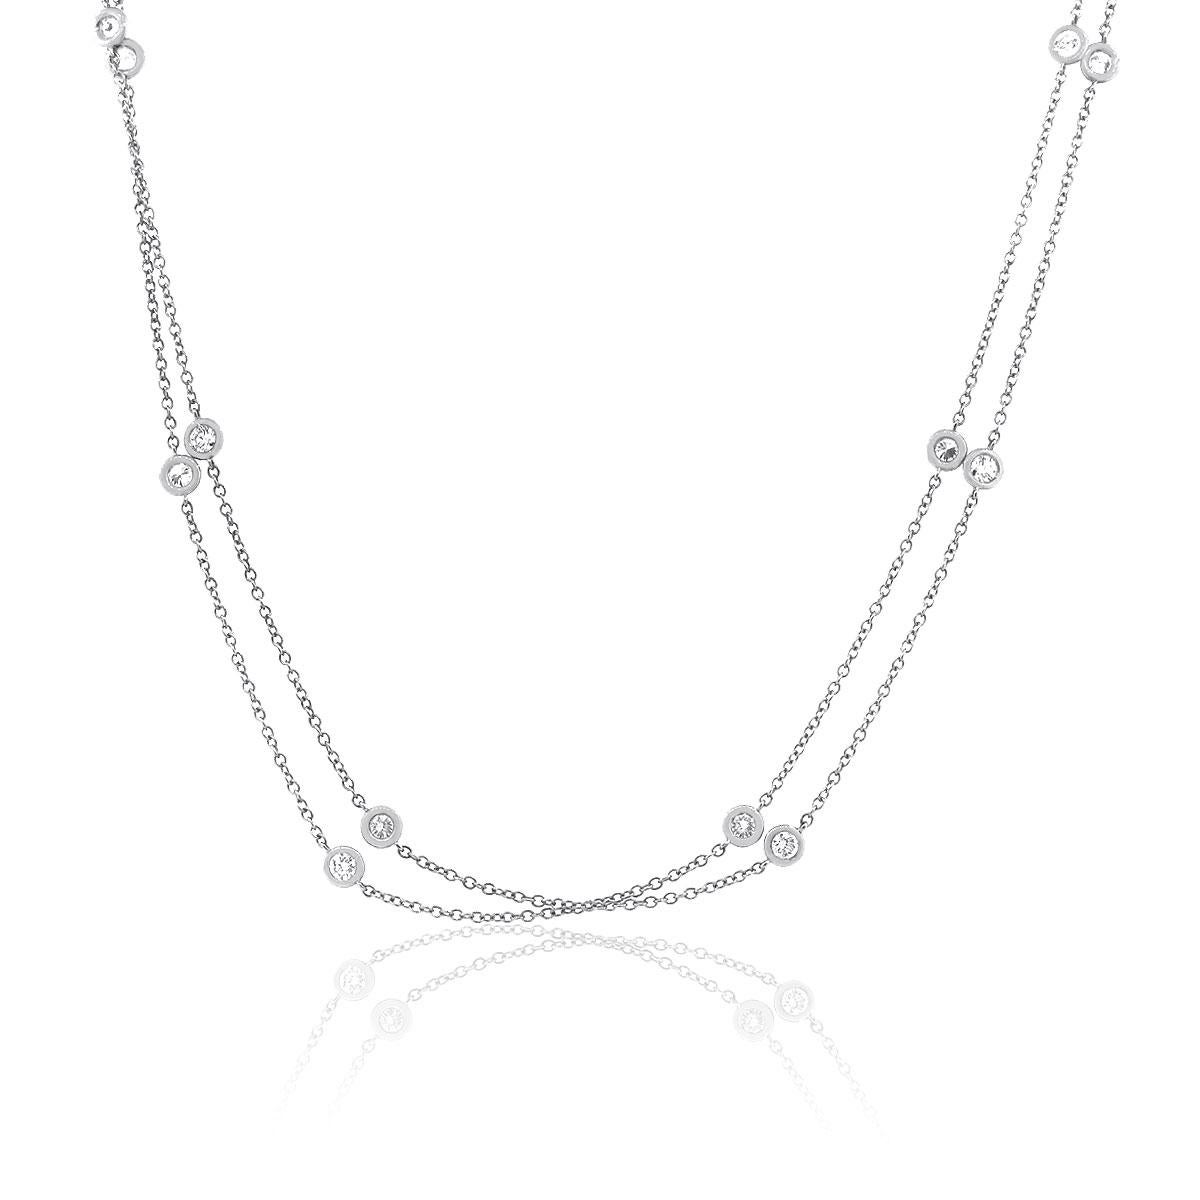 Material: 18k White Gold
Diamond Details: Approximately 2.5ctw of round brilliant diamonds. Diamonds are G-H in color and VS in clarity
Necklace Measurements: 36.5″
Clasp: Lobster Claw Clasp
Total Weight: 9g (5.8dwt)
SKU: A30311876